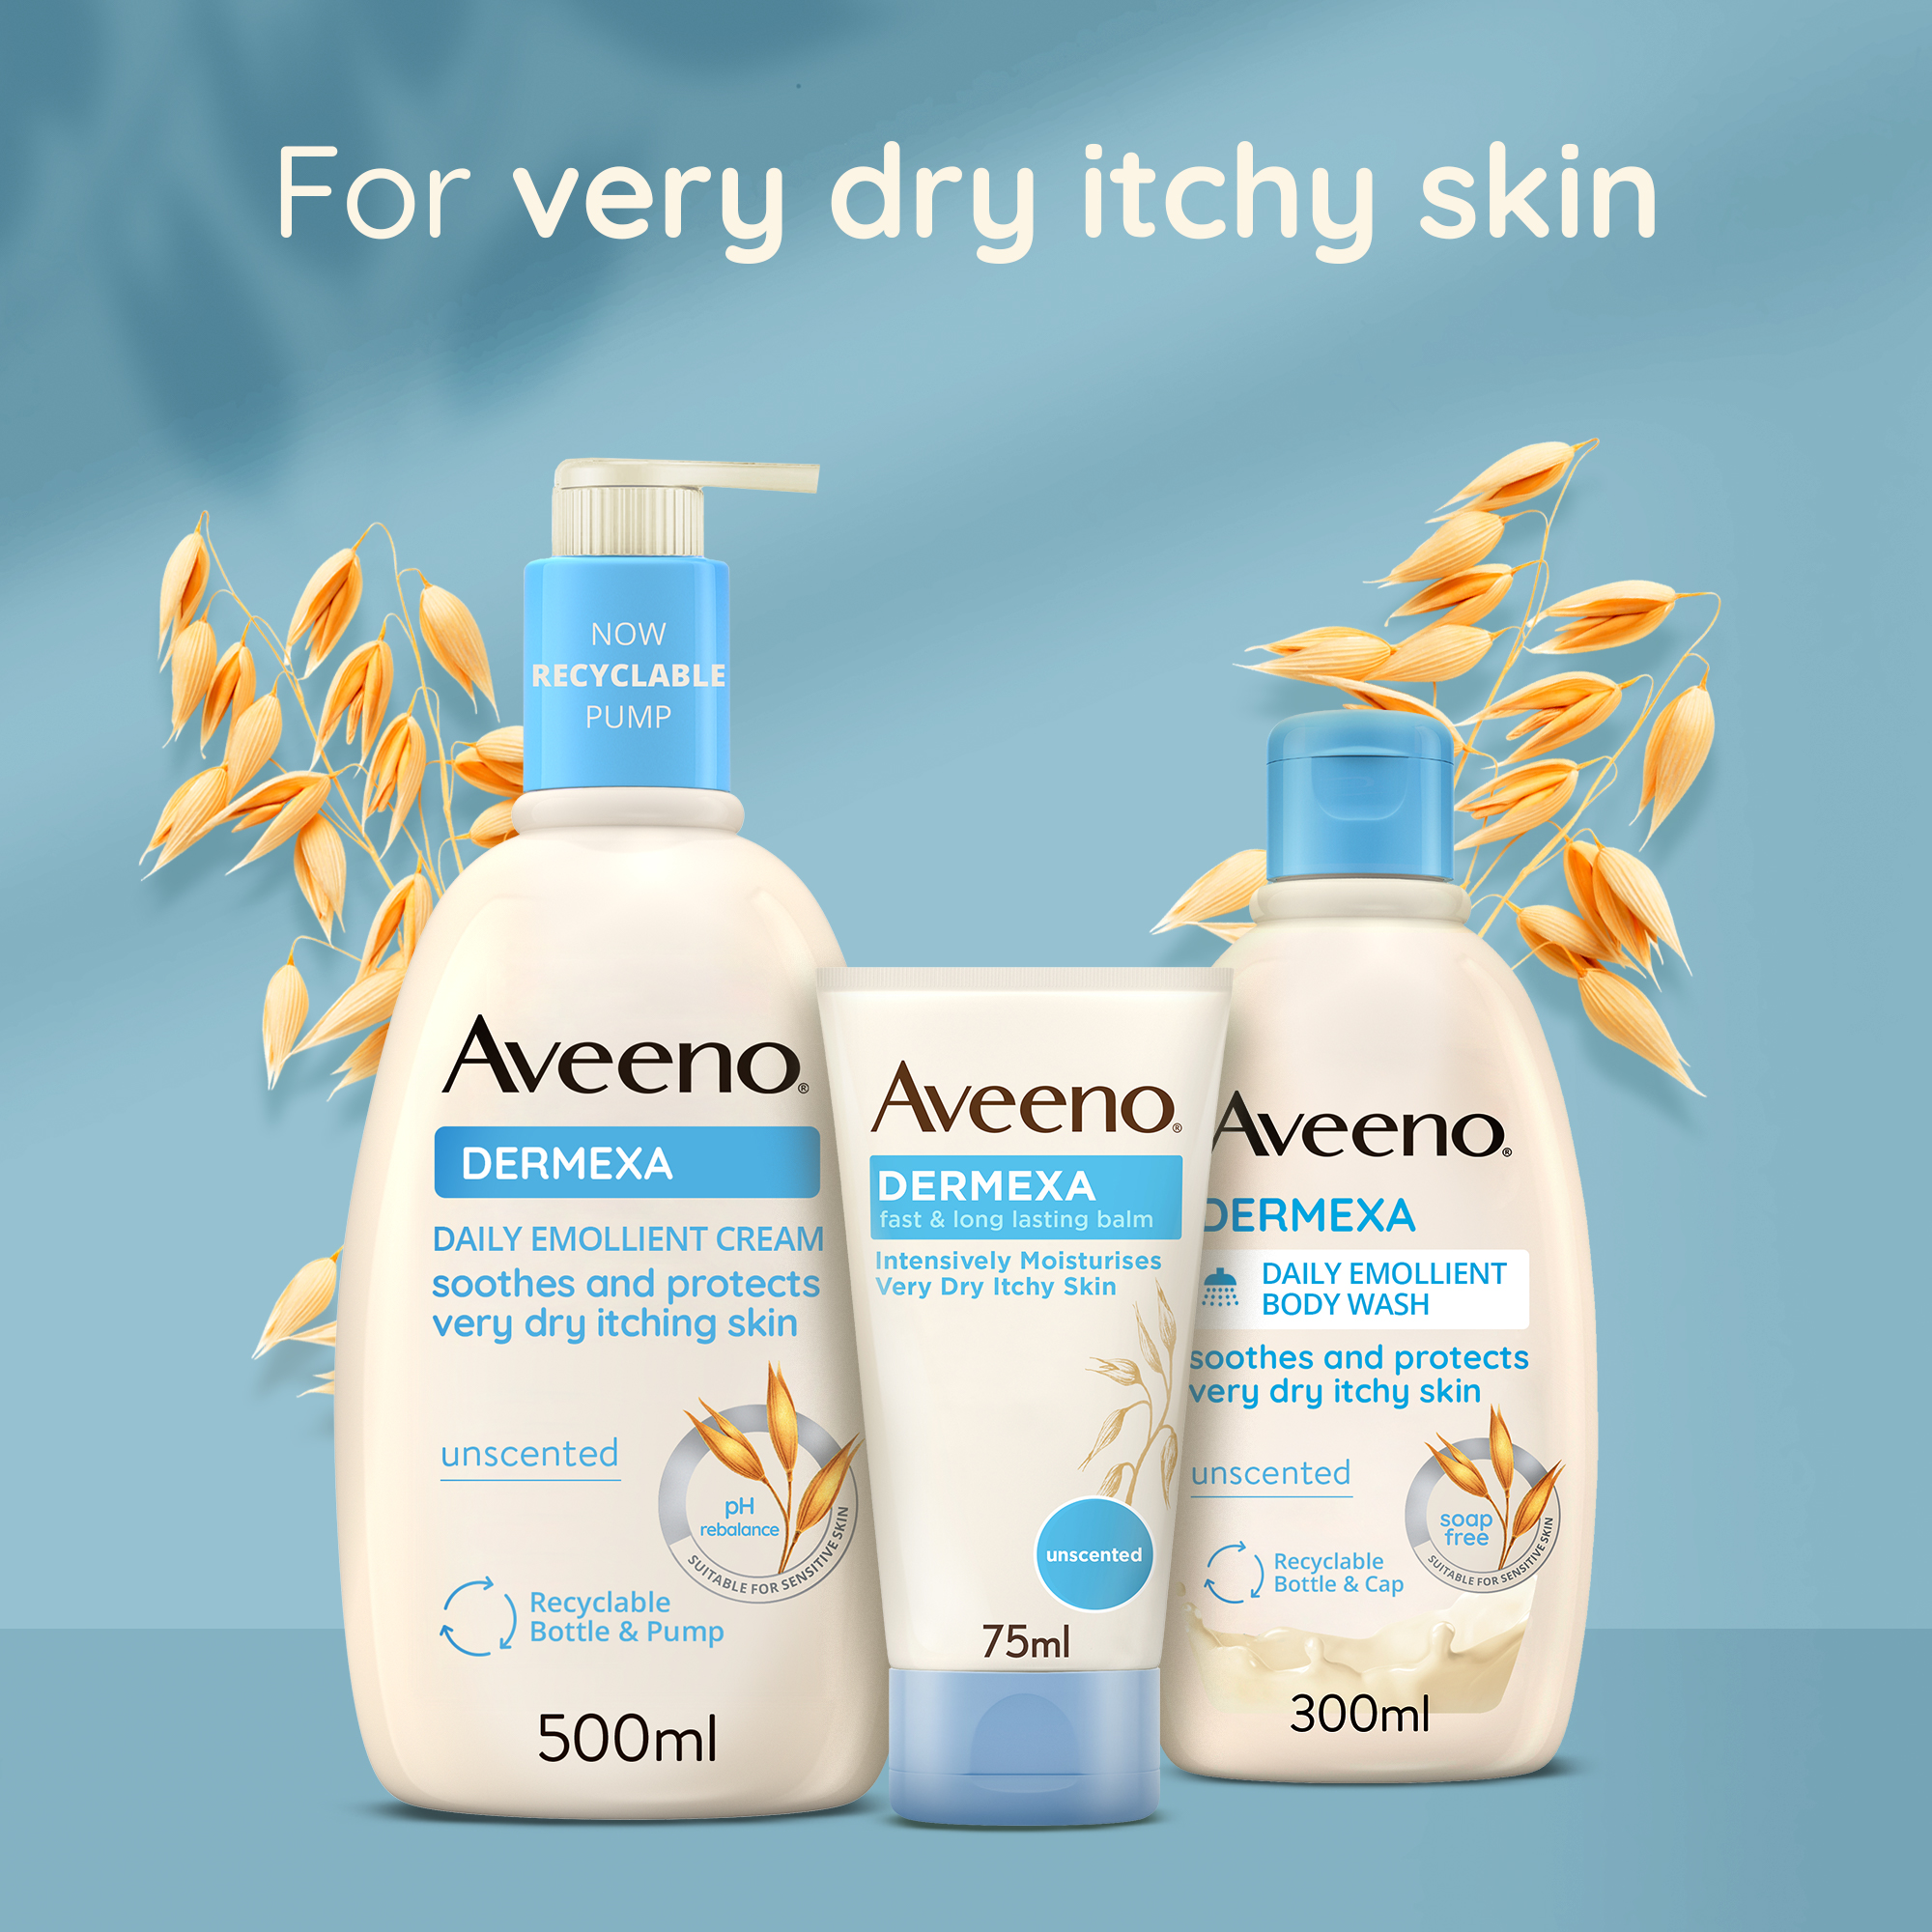 for very dry, itchy skin